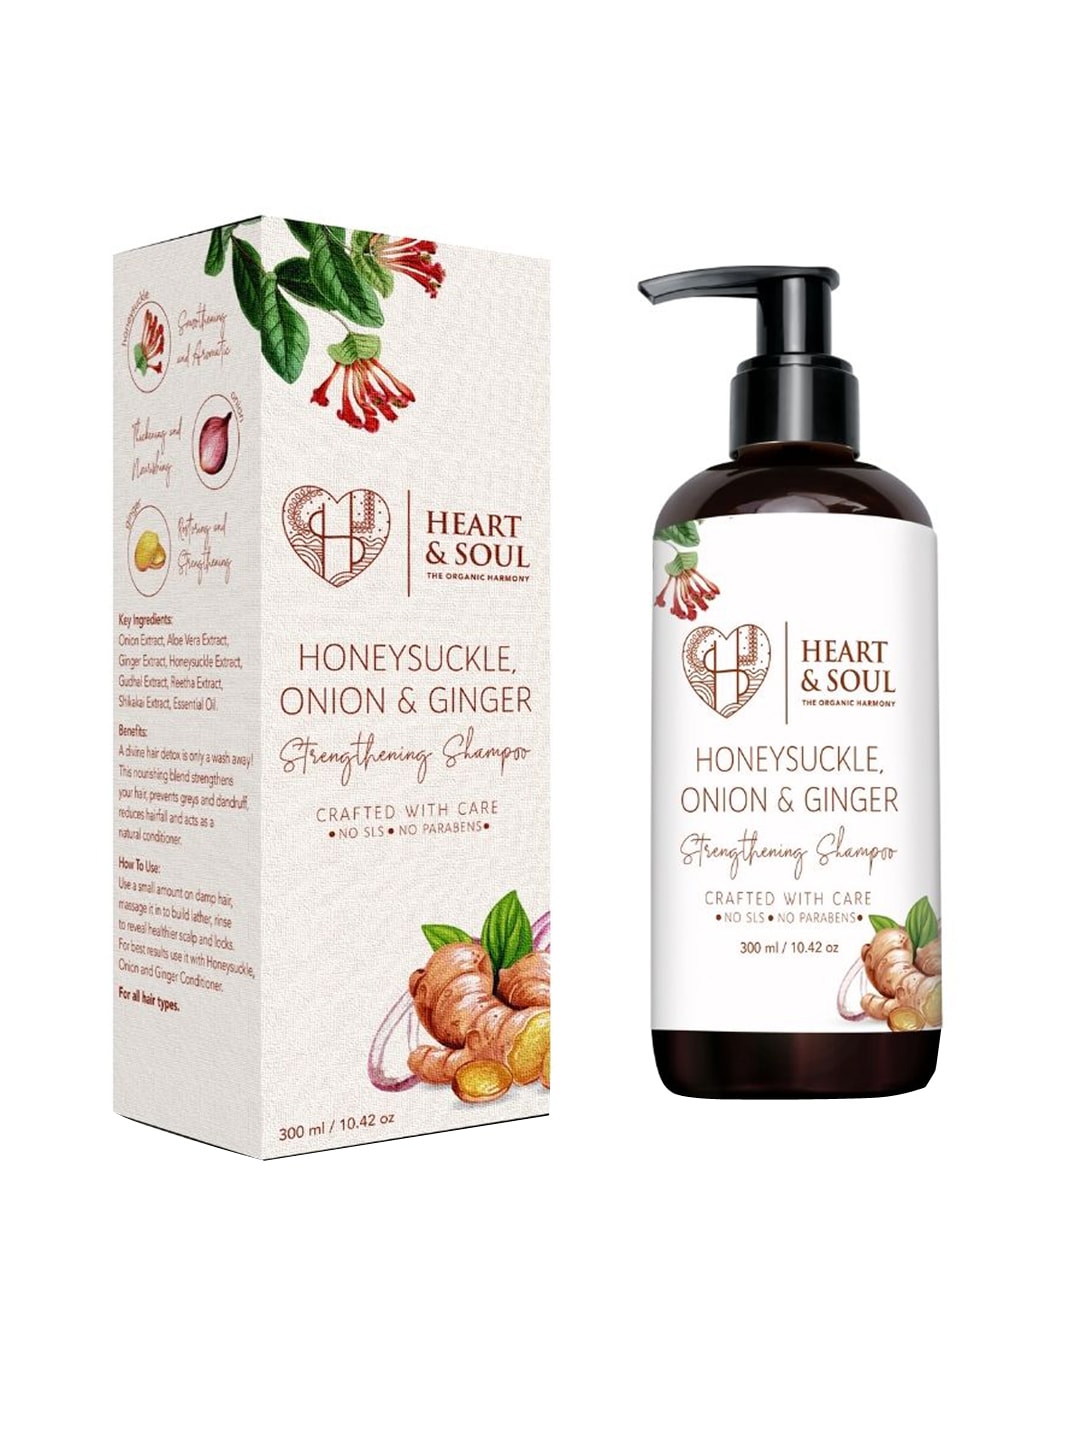 HEART AND SOUL Honeysuckle Onion & Ginger Shampoo - 300ml Price in India